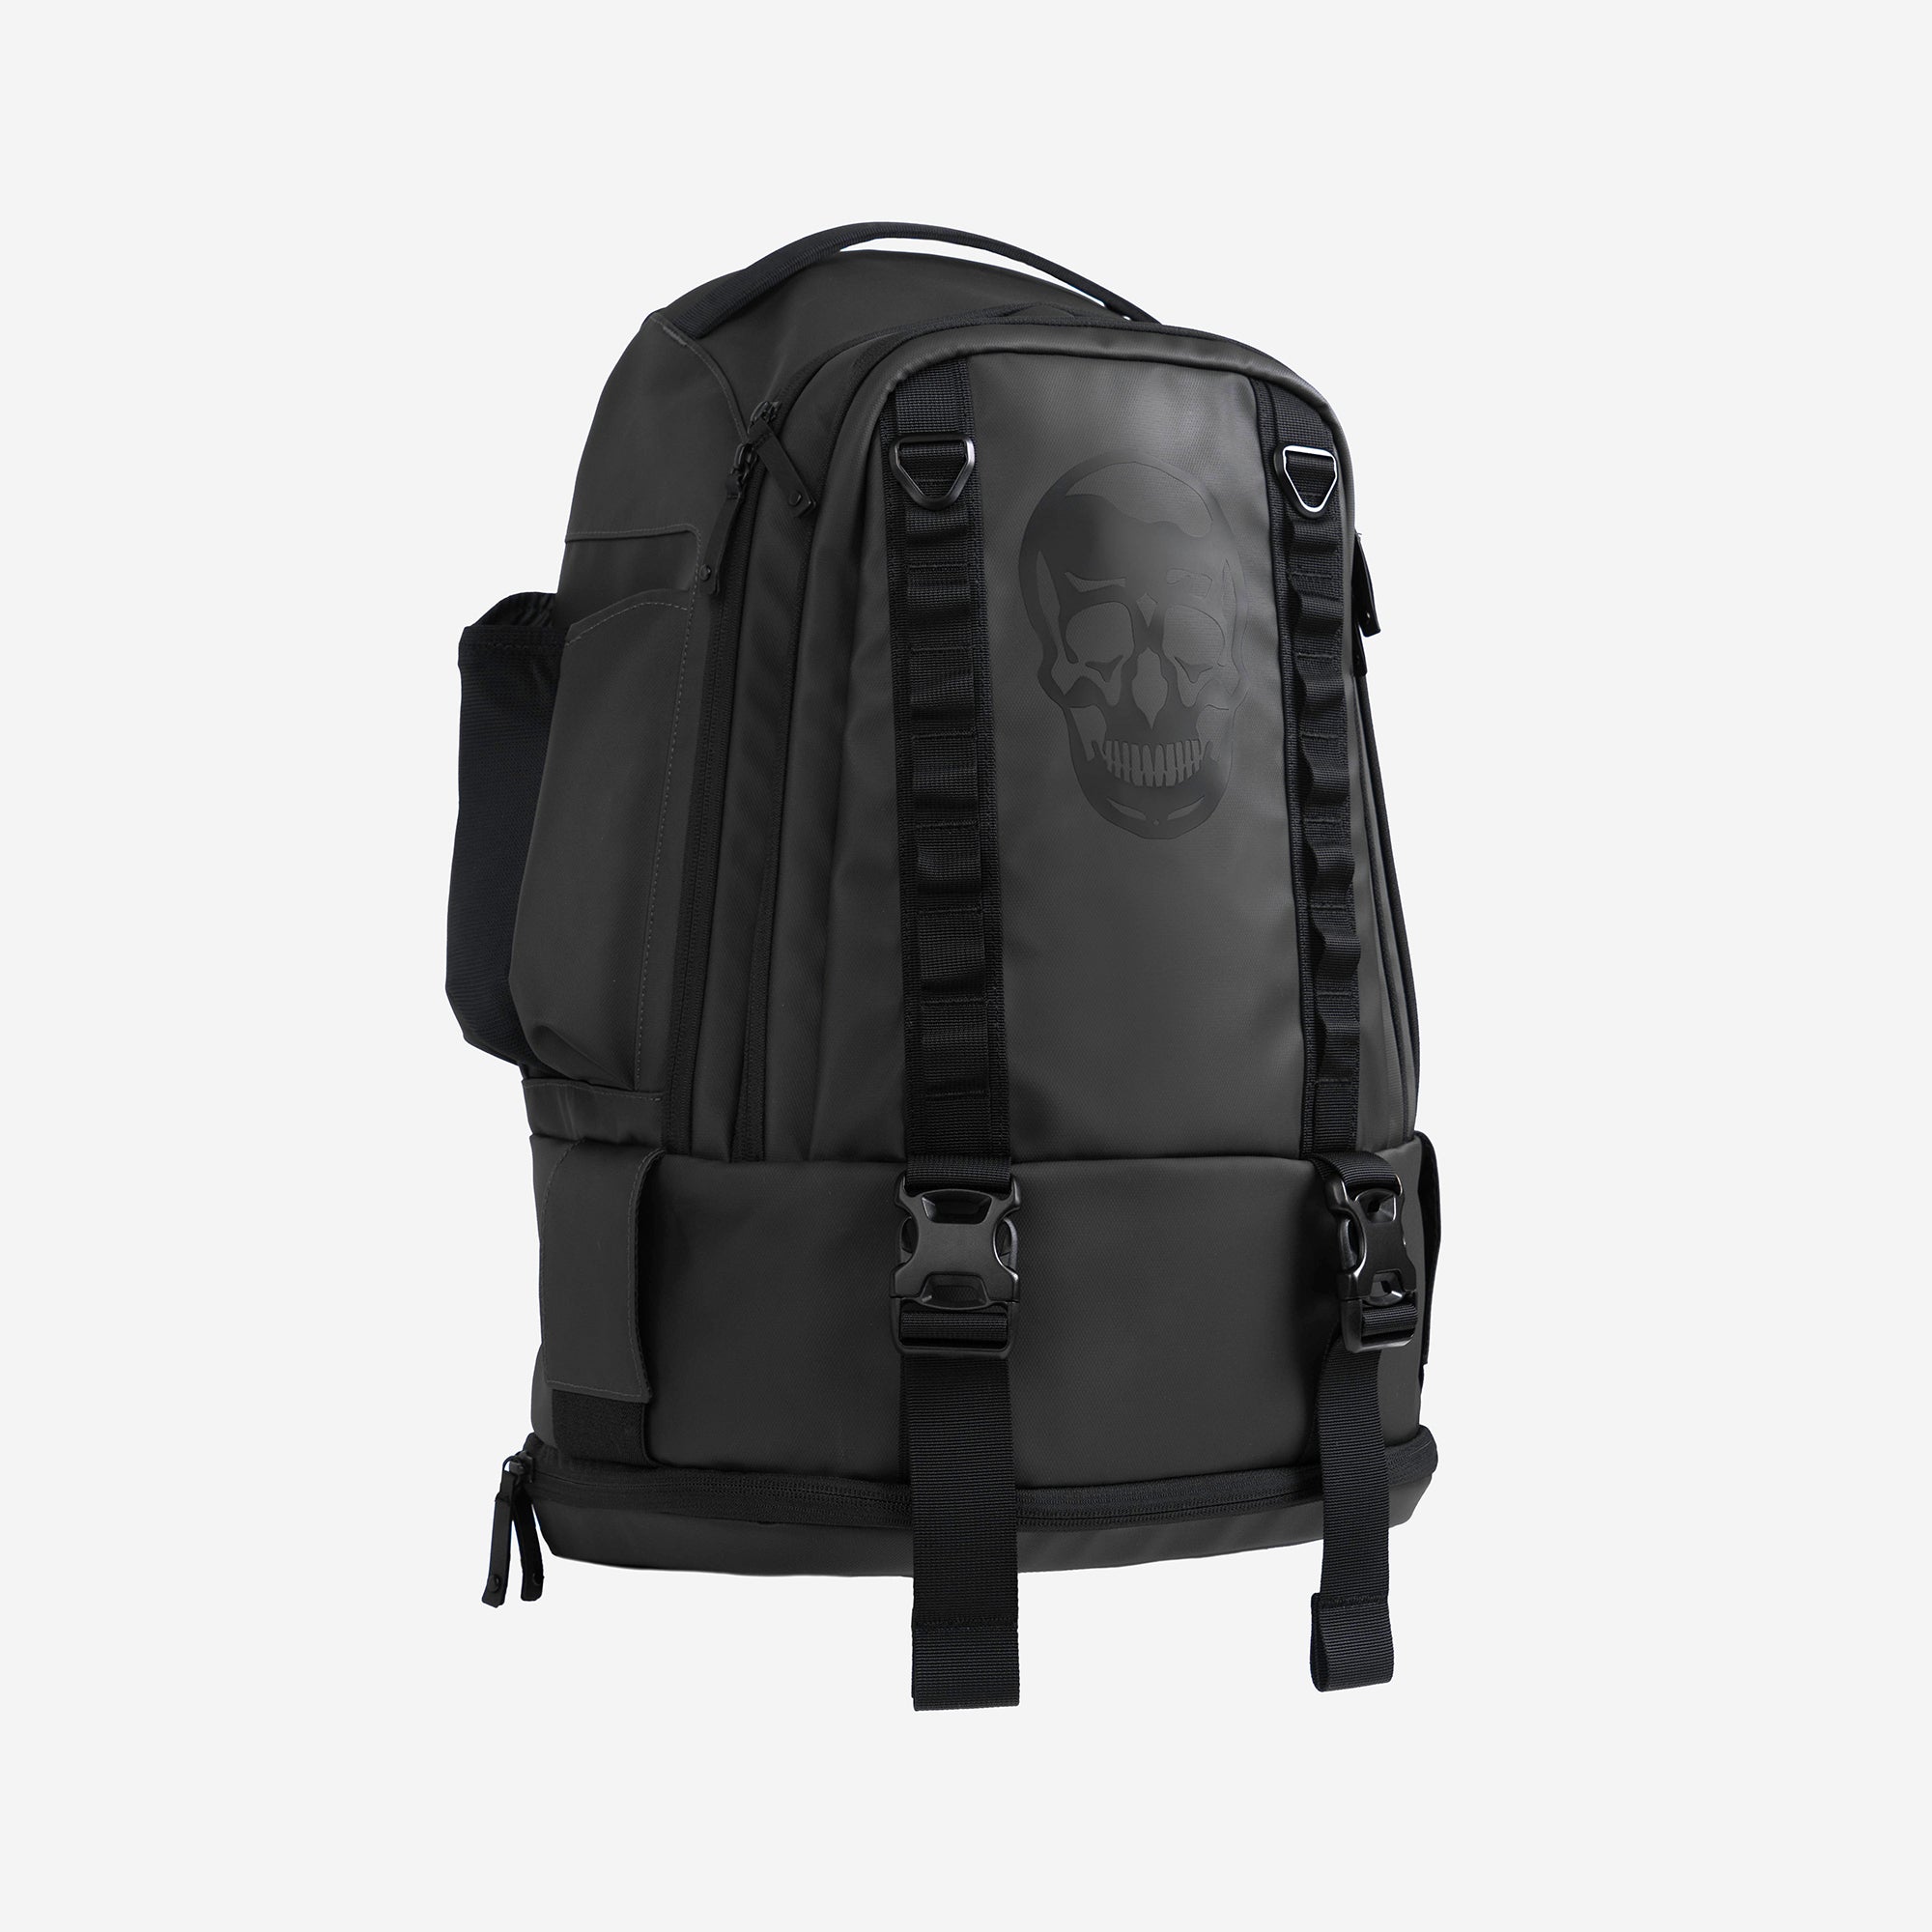 PUMA Porsche Legacy Backpack 33 L Laptop Backpack Black. - Price in India